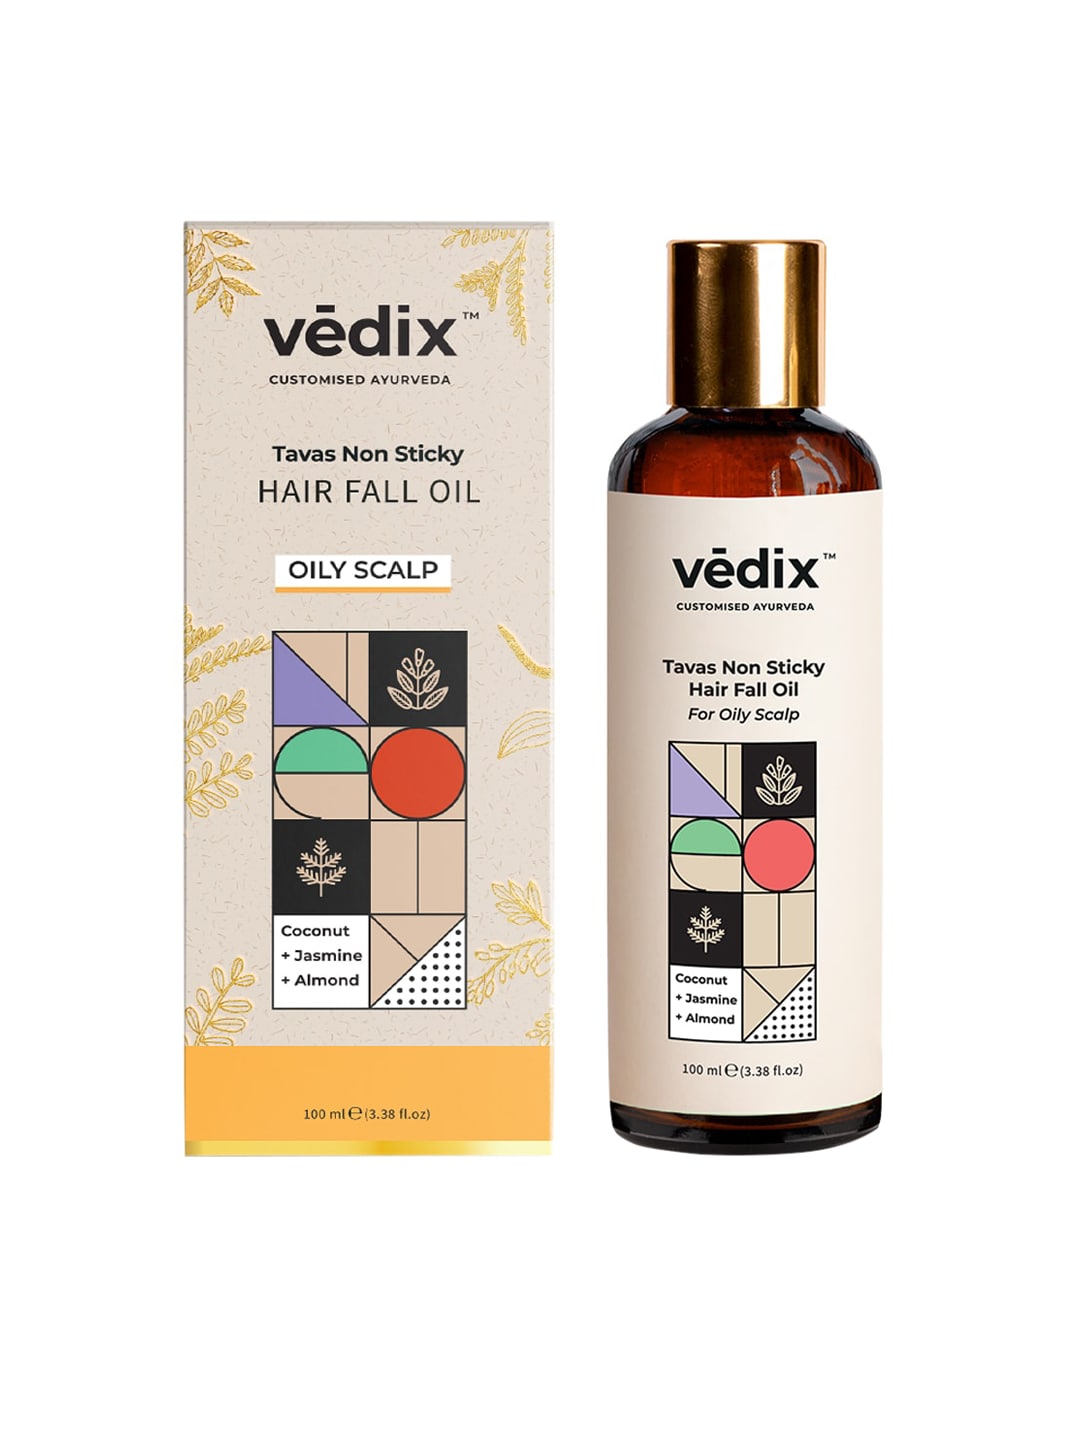 VEDIX Customized Ayurvedic HairFall Oil 100ml Price in India, Full  Specifications & Offers 